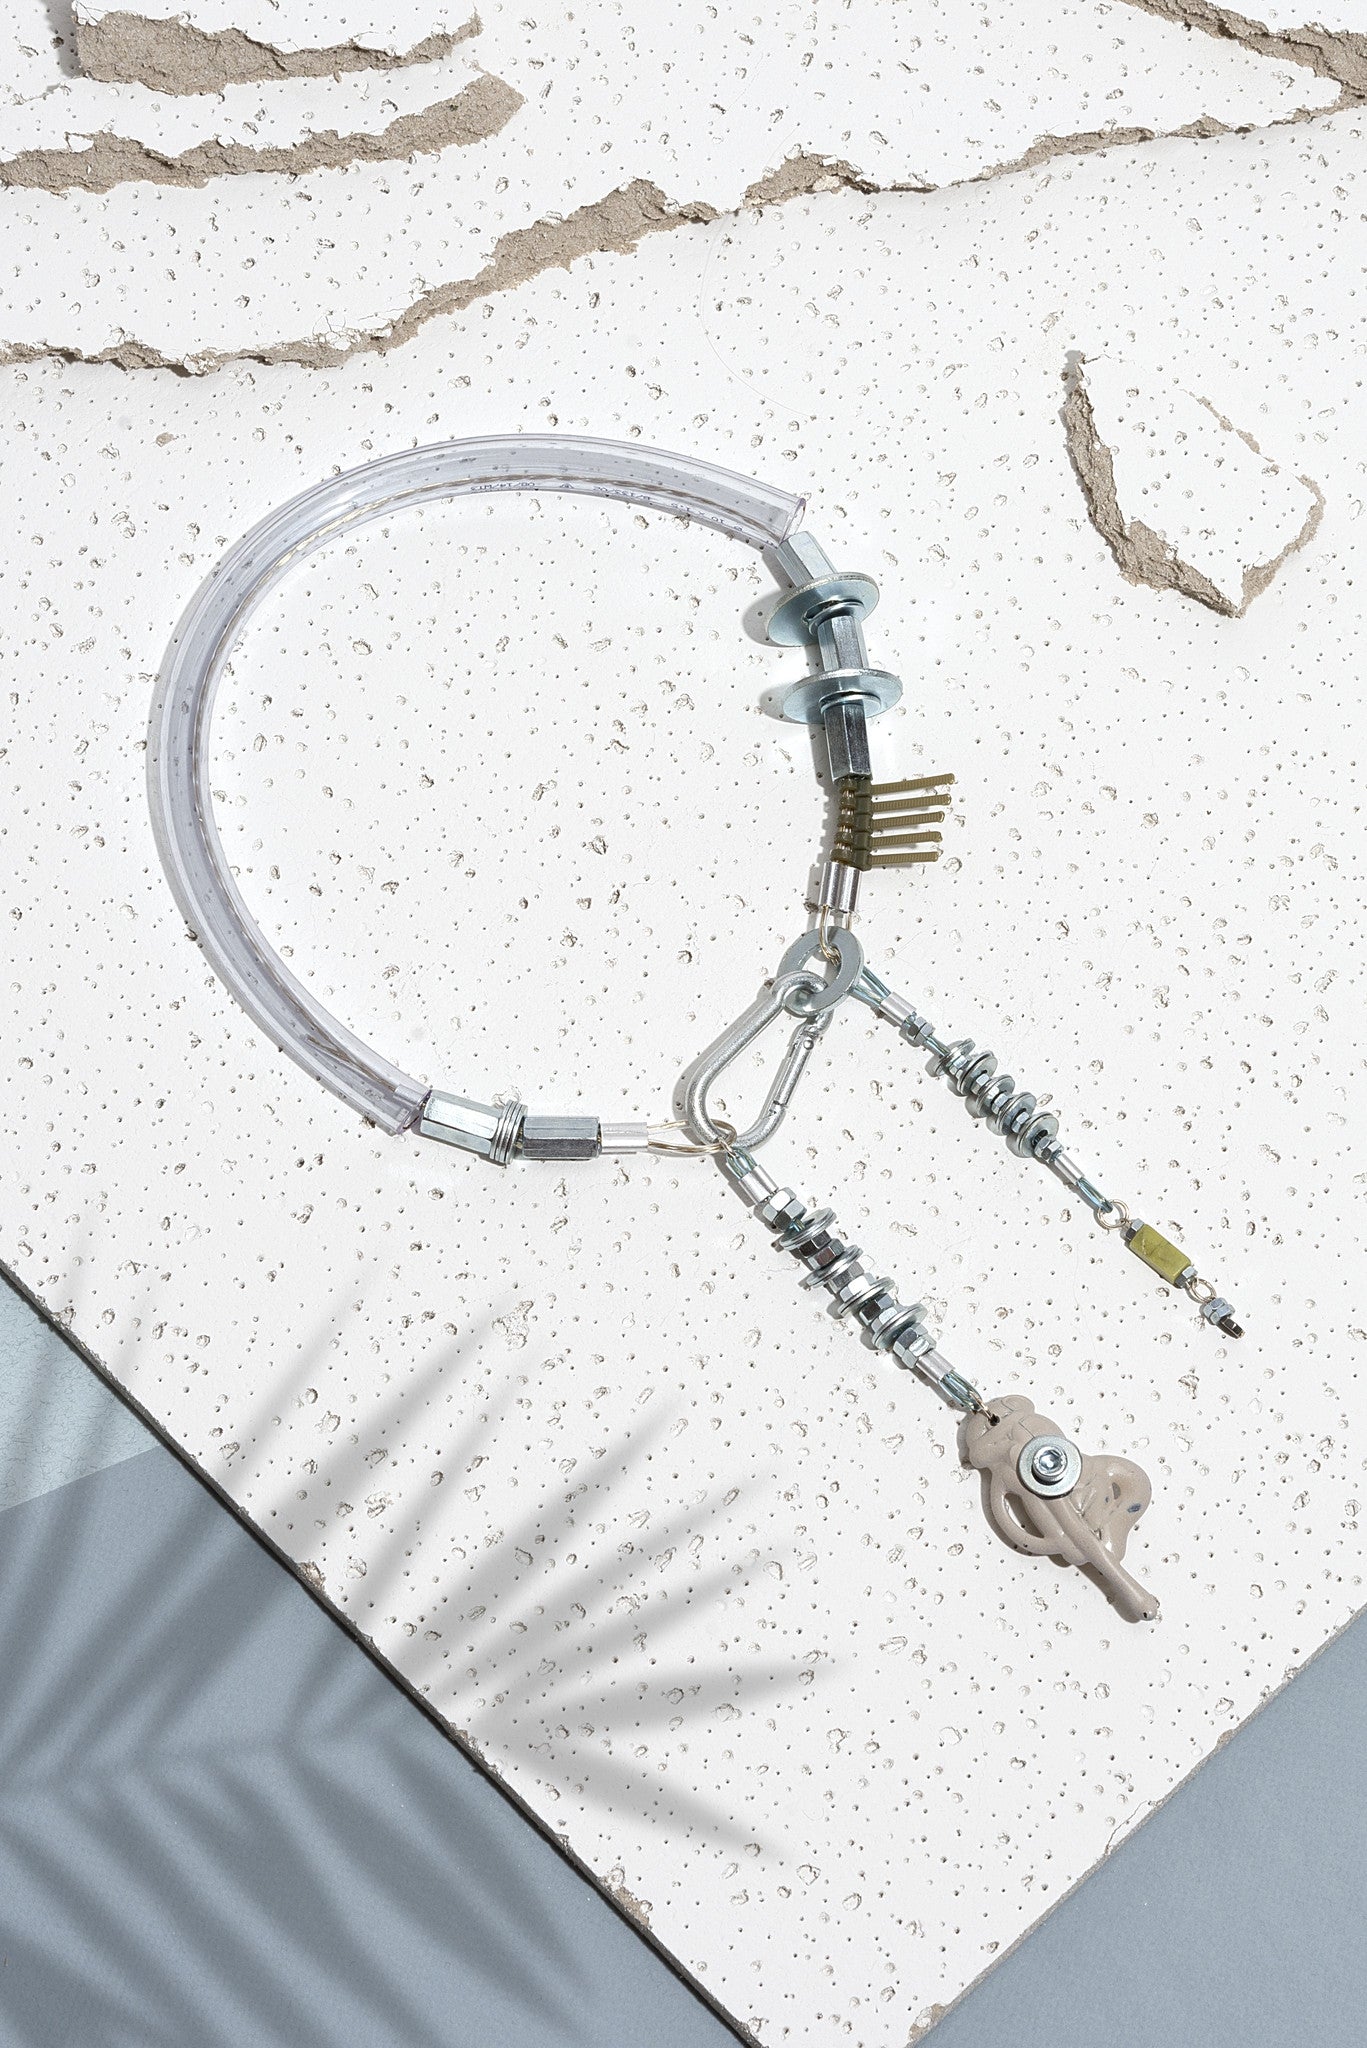 We craft the strongest base for all your experiences and keep them safely. So it consists of building materials such as screws, cable covered by plastic and transperant plastic tube. The nude detail is also handmaded and made of melted plastic. Necklace is also decorated with Amazonite mineral stone. Every Mellow piece has it's own life code, so do this one - N4/014. As well it means this product is one of the kind